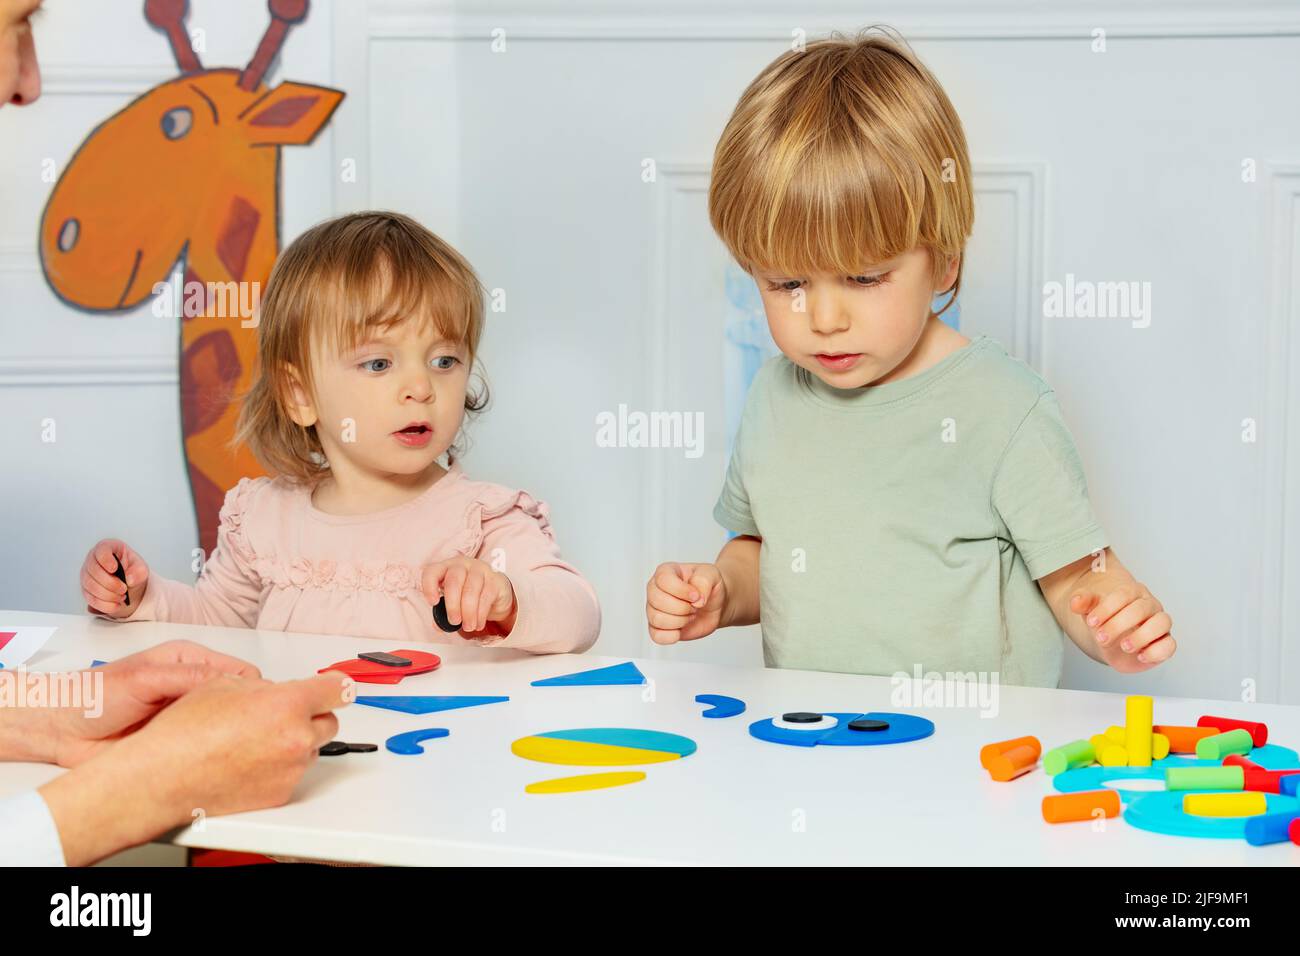 Little kids boy and a girl put together shapes on the table Stock Photo